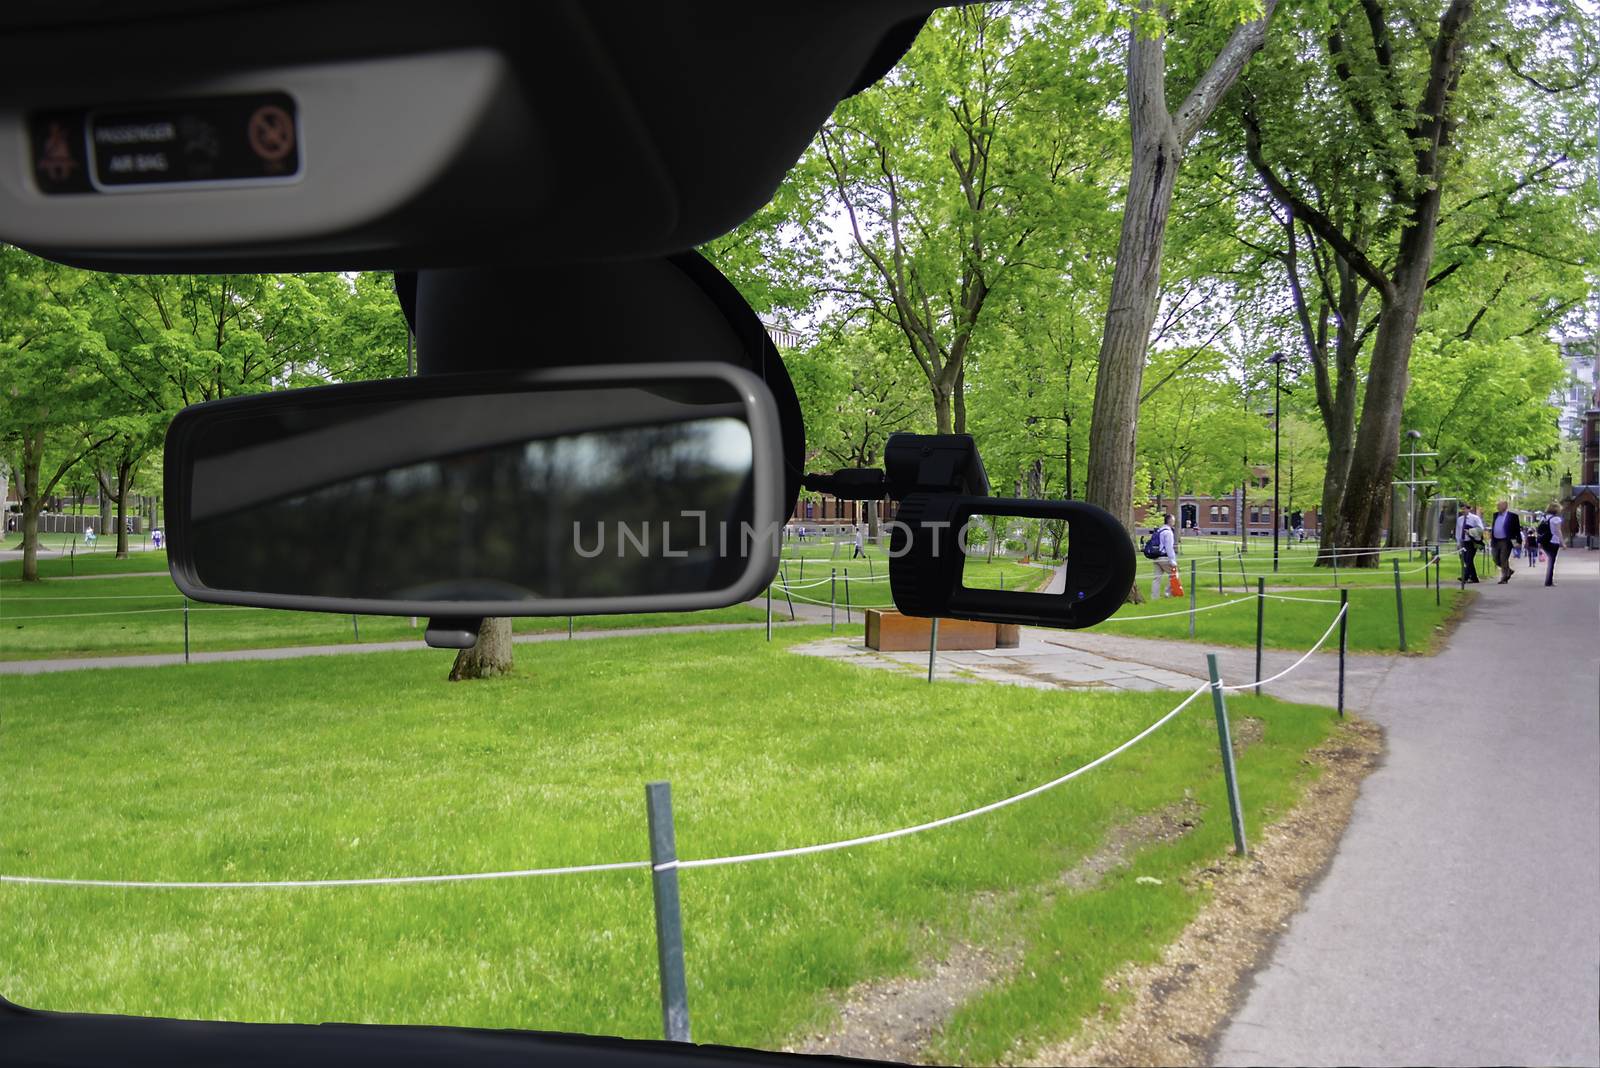 Looking through a dashcam car camera installed on a windshield with view of the Harvard University Campus, Cambridge, USA